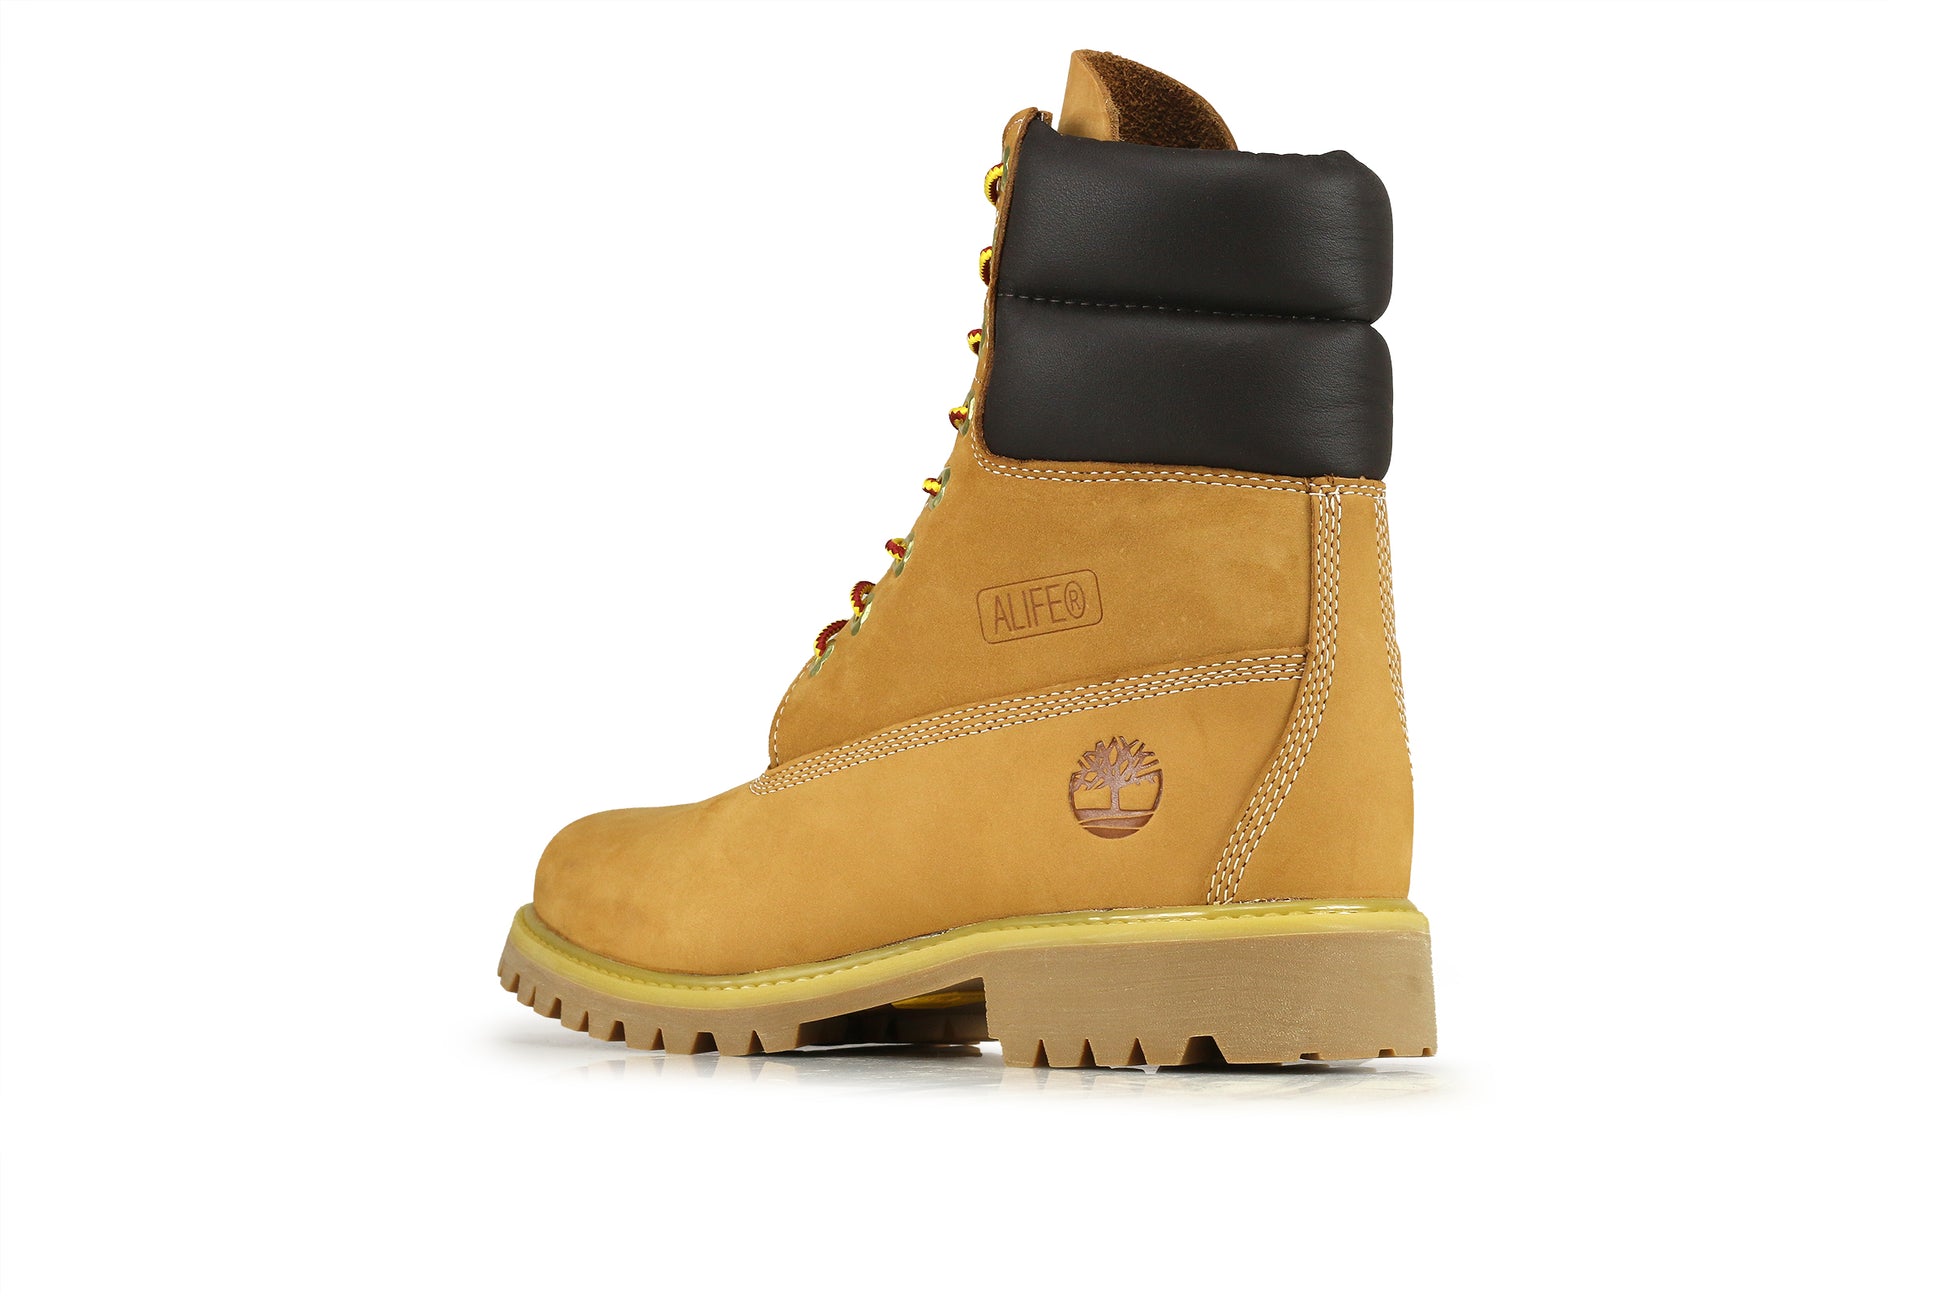 Pakistaans onkruid Uluru Beyoncé in special-edition tb0a1amk Timberland x Bee Line Honeycomb boots